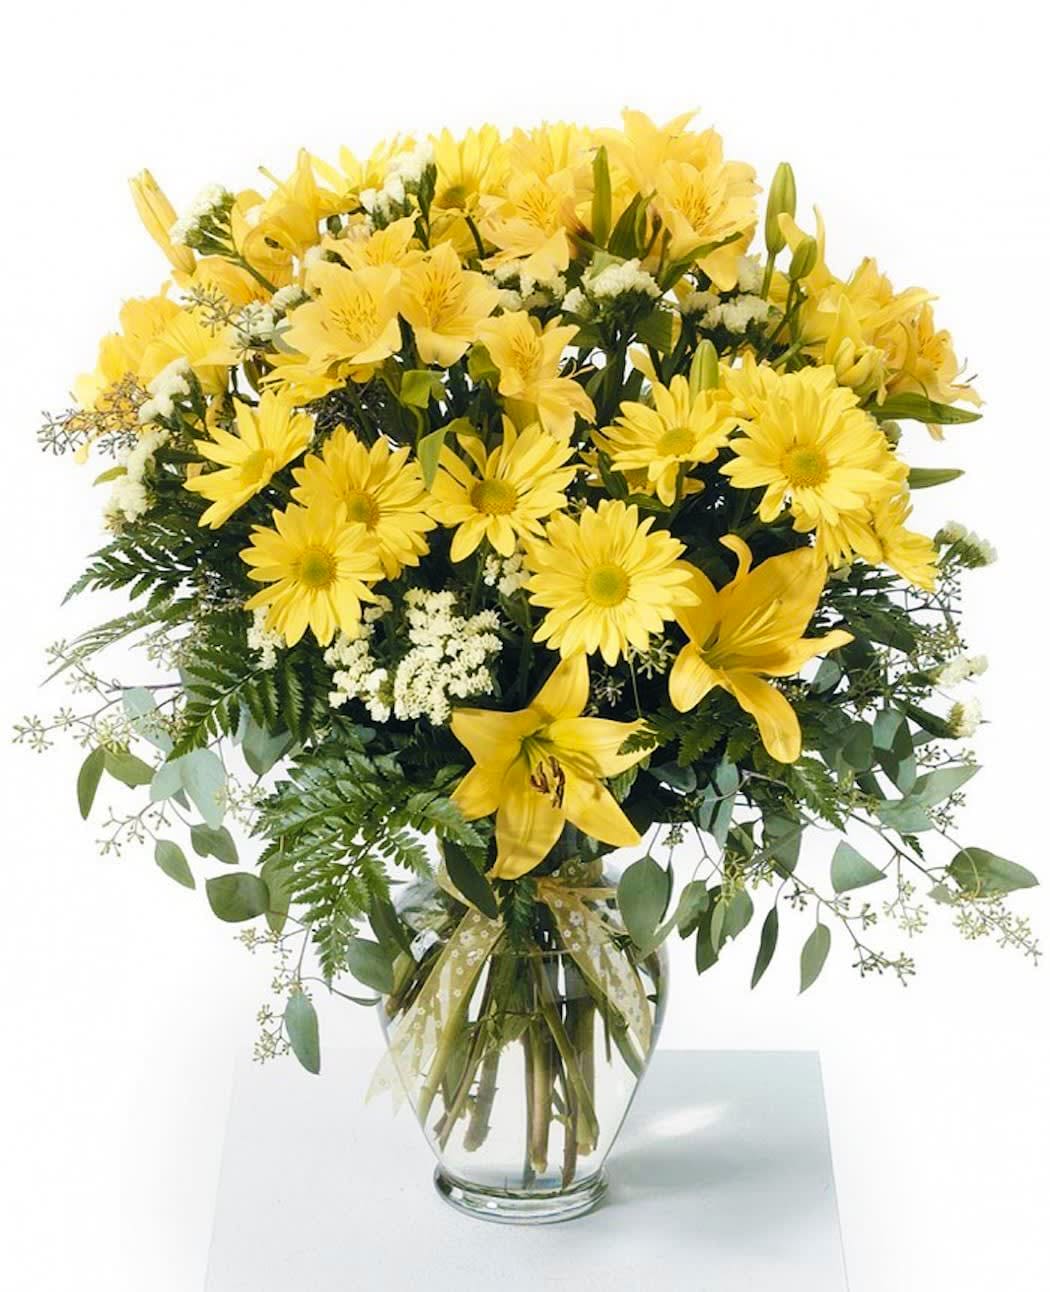 Sunkissed Splendor - This bountiful arrangement for service or home, includes a variety of select yellow florals including Lilies, Daisy Pompons and Alstromeria.